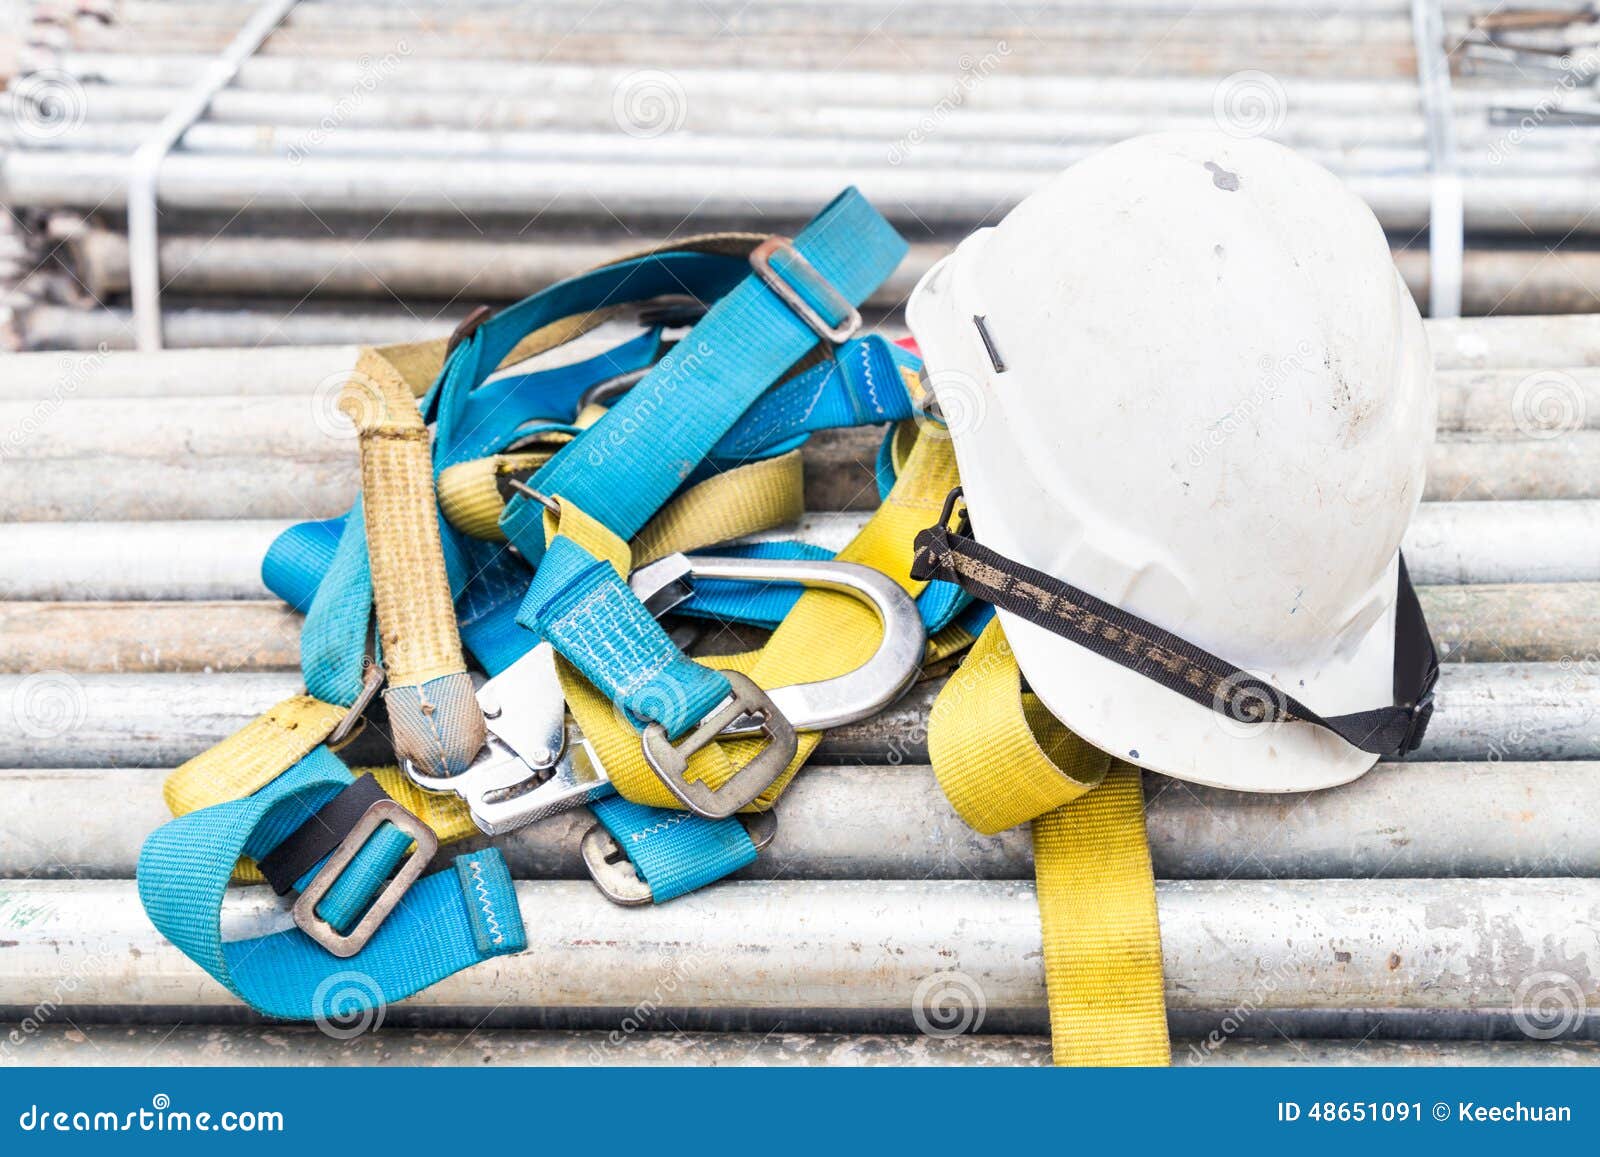 safety harness and helmet